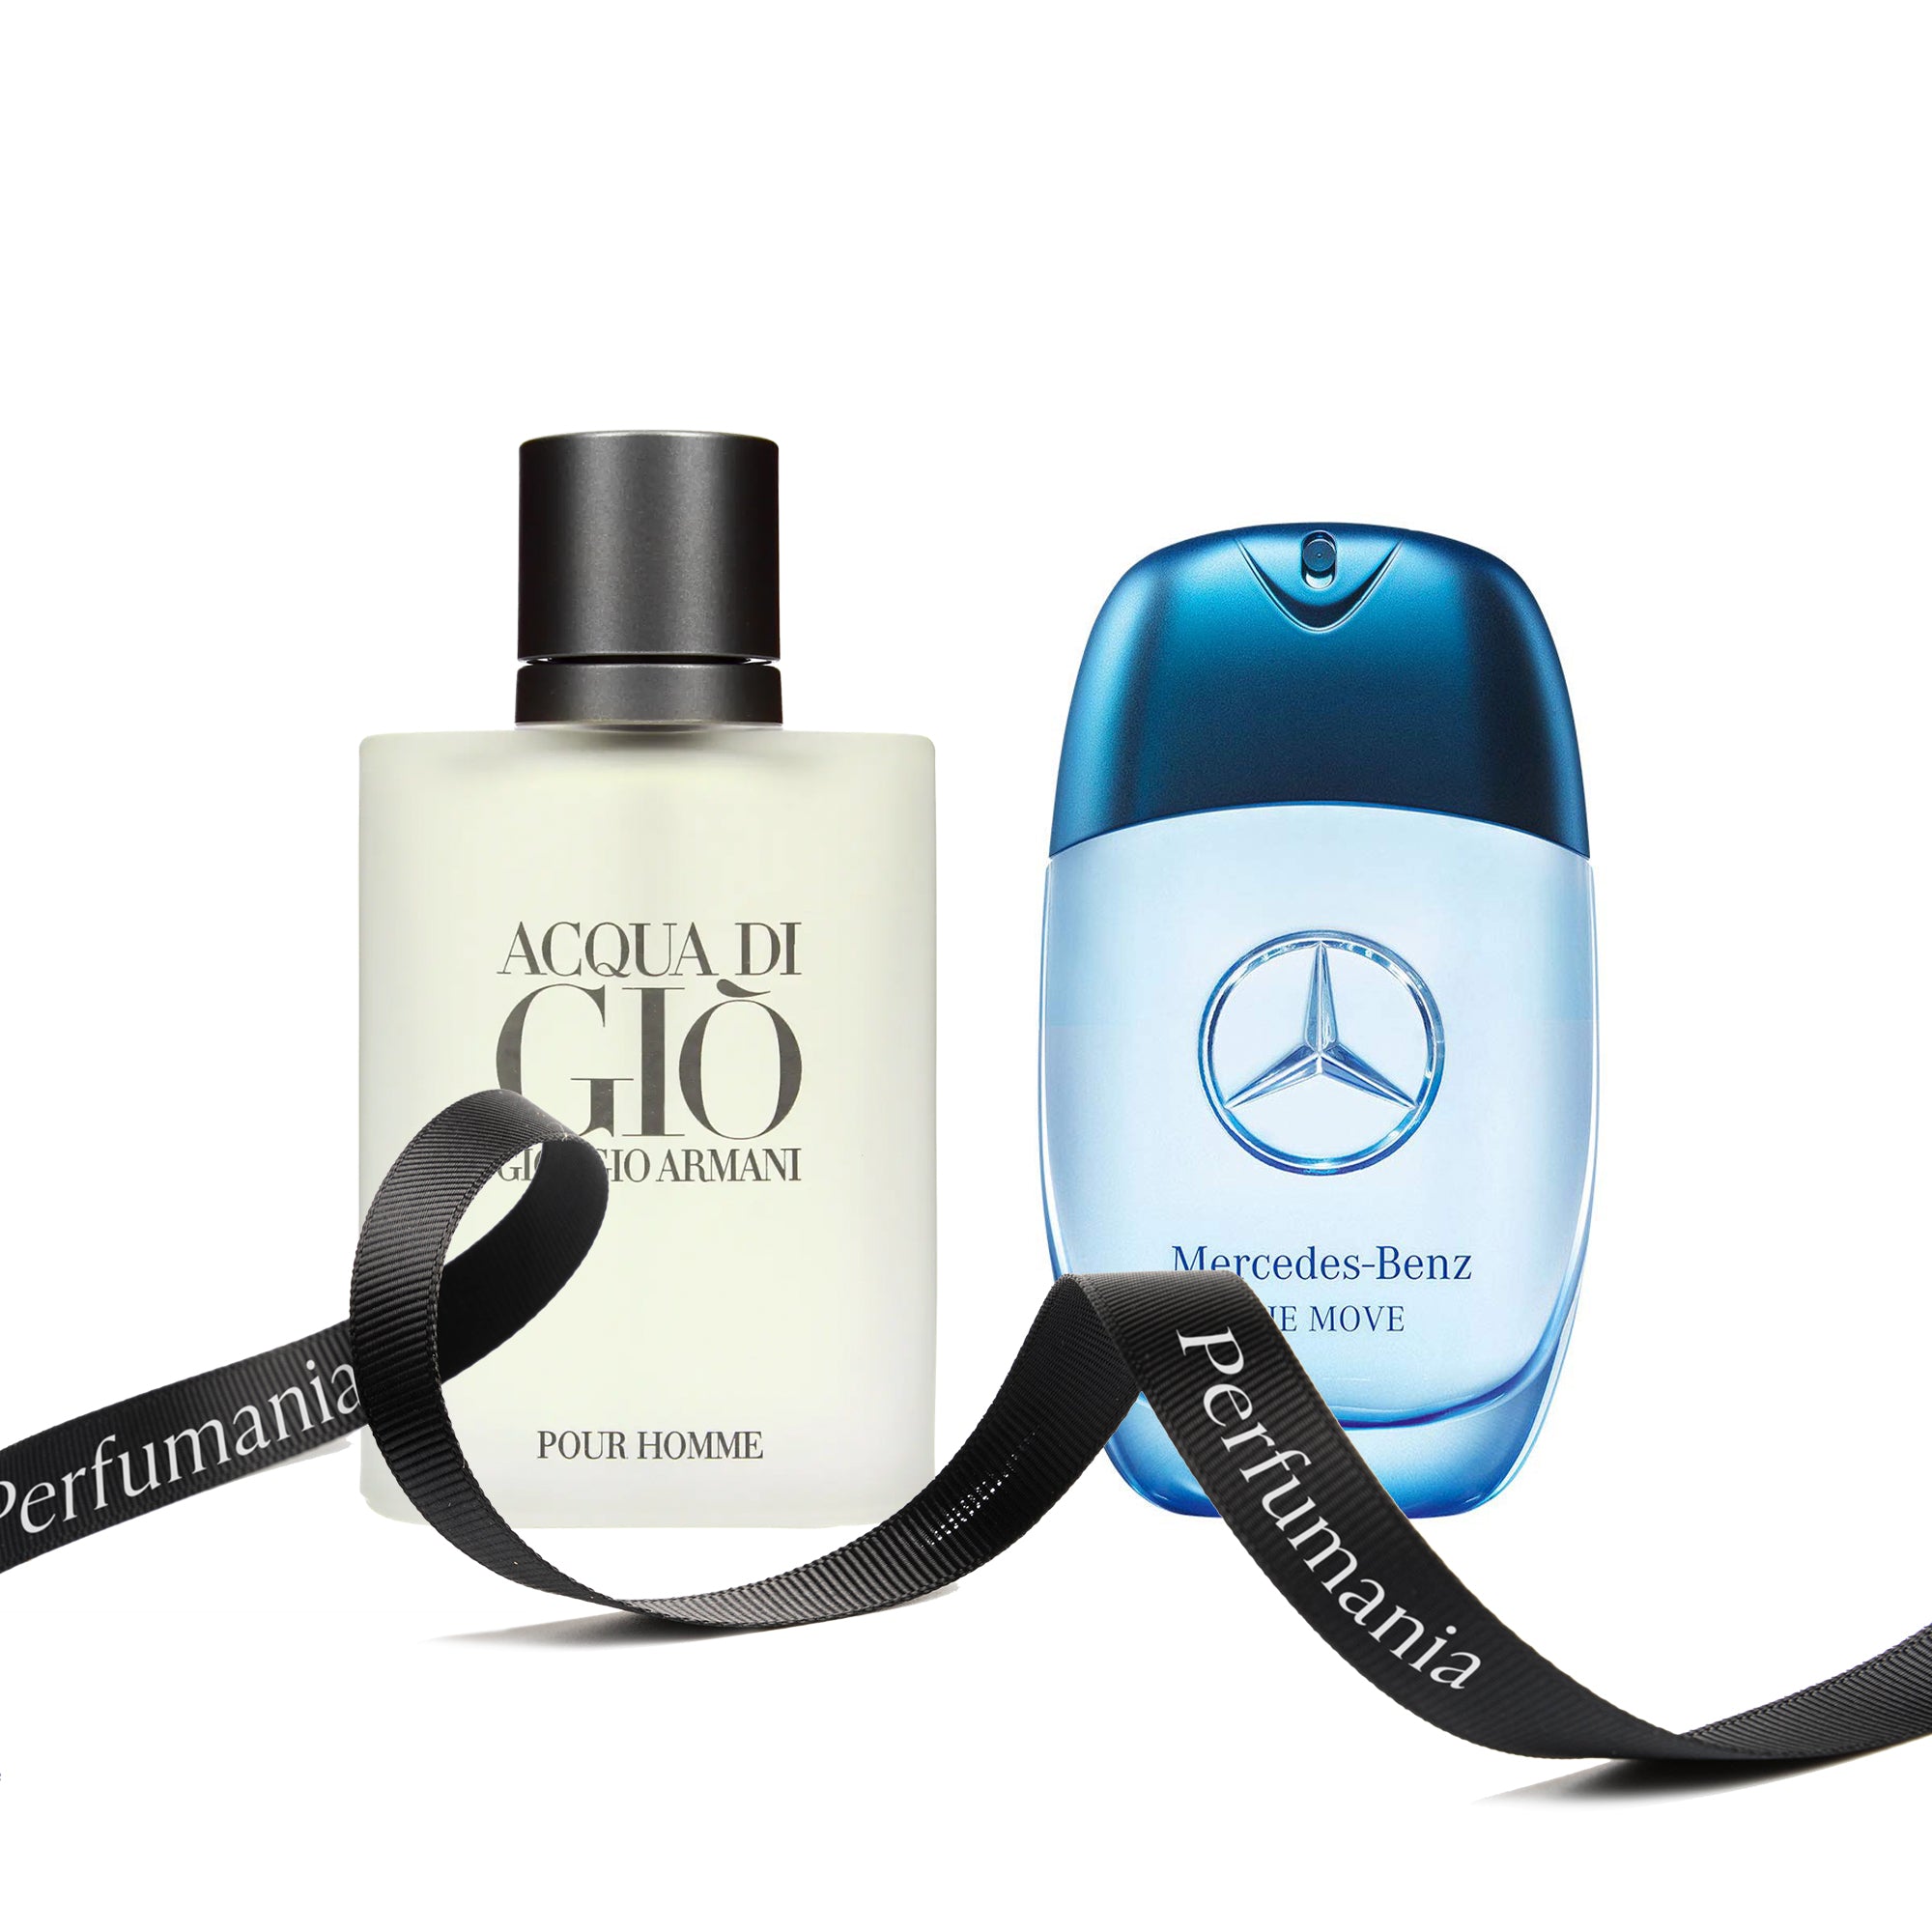 Bundle for Men: Acqua di Gio by Armani and Express Yourself by Mercedes-Benz Featured image